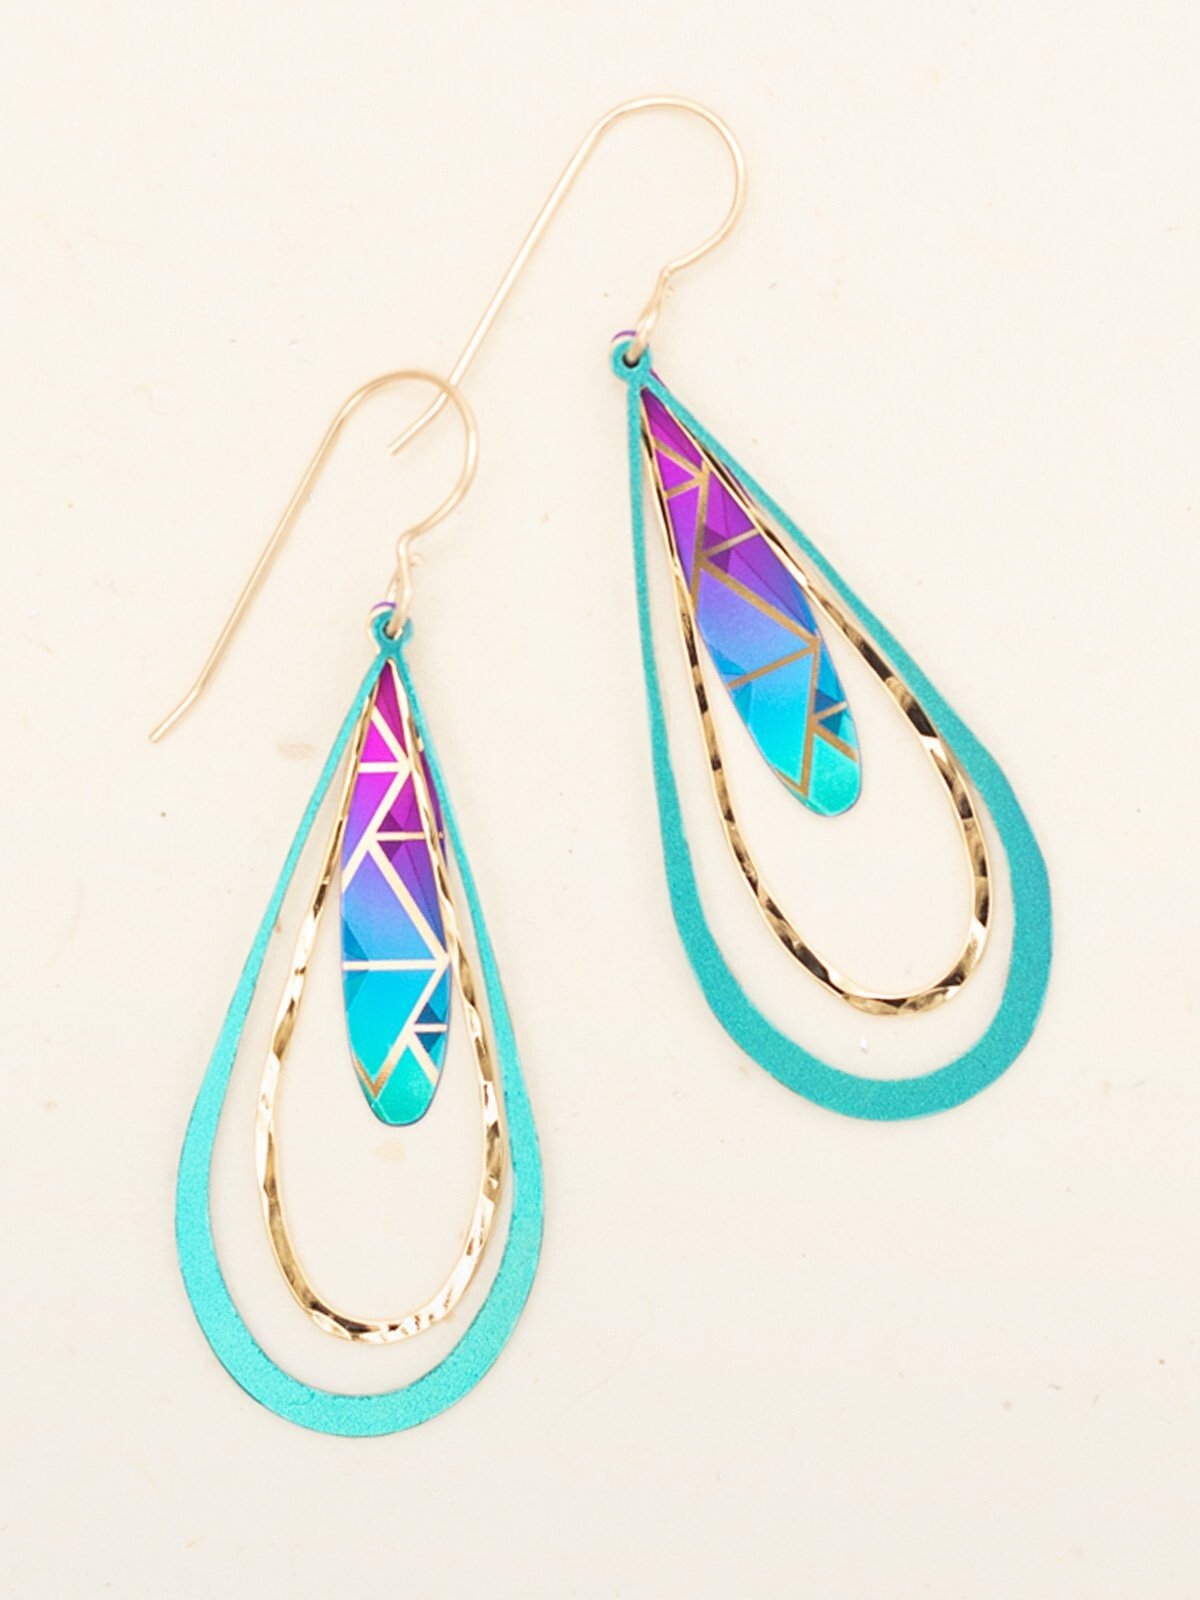 Bright colored drop earrings by Holly Yashi